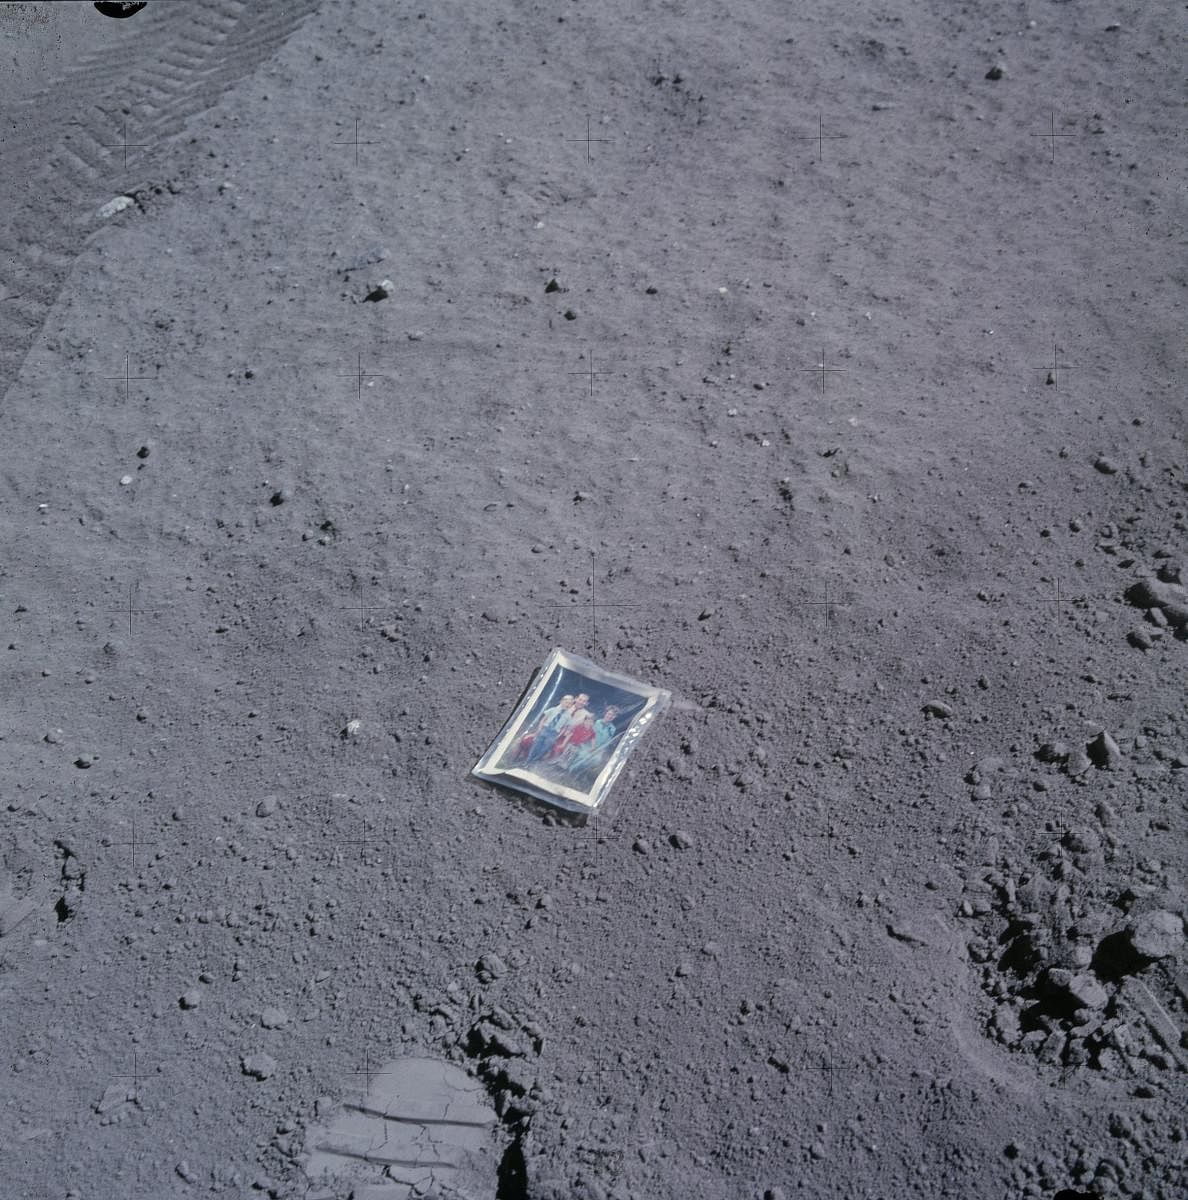 The family picture Duke left on the Moon